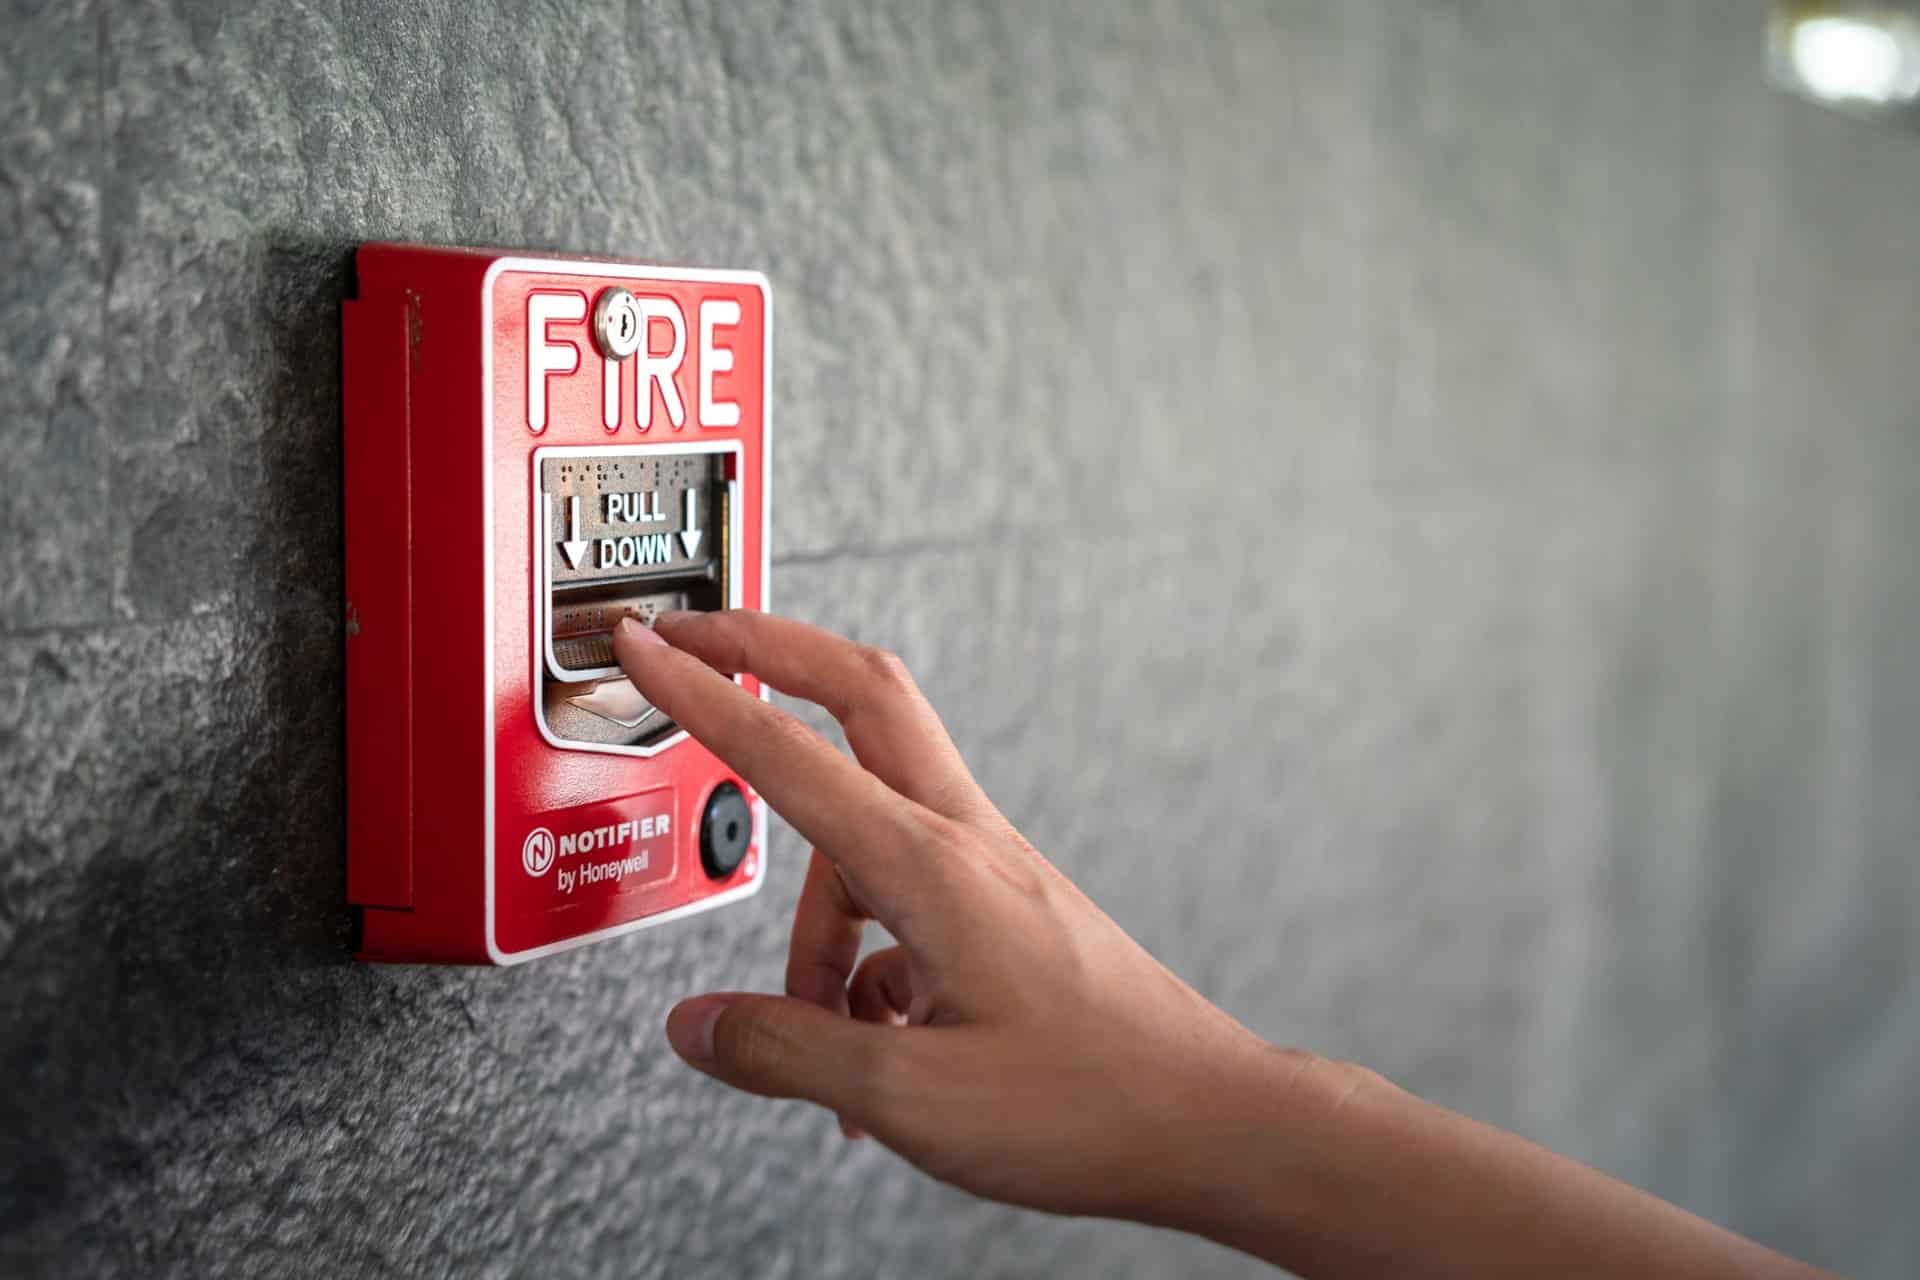 This is a photo of someone pulling a fire alarm.